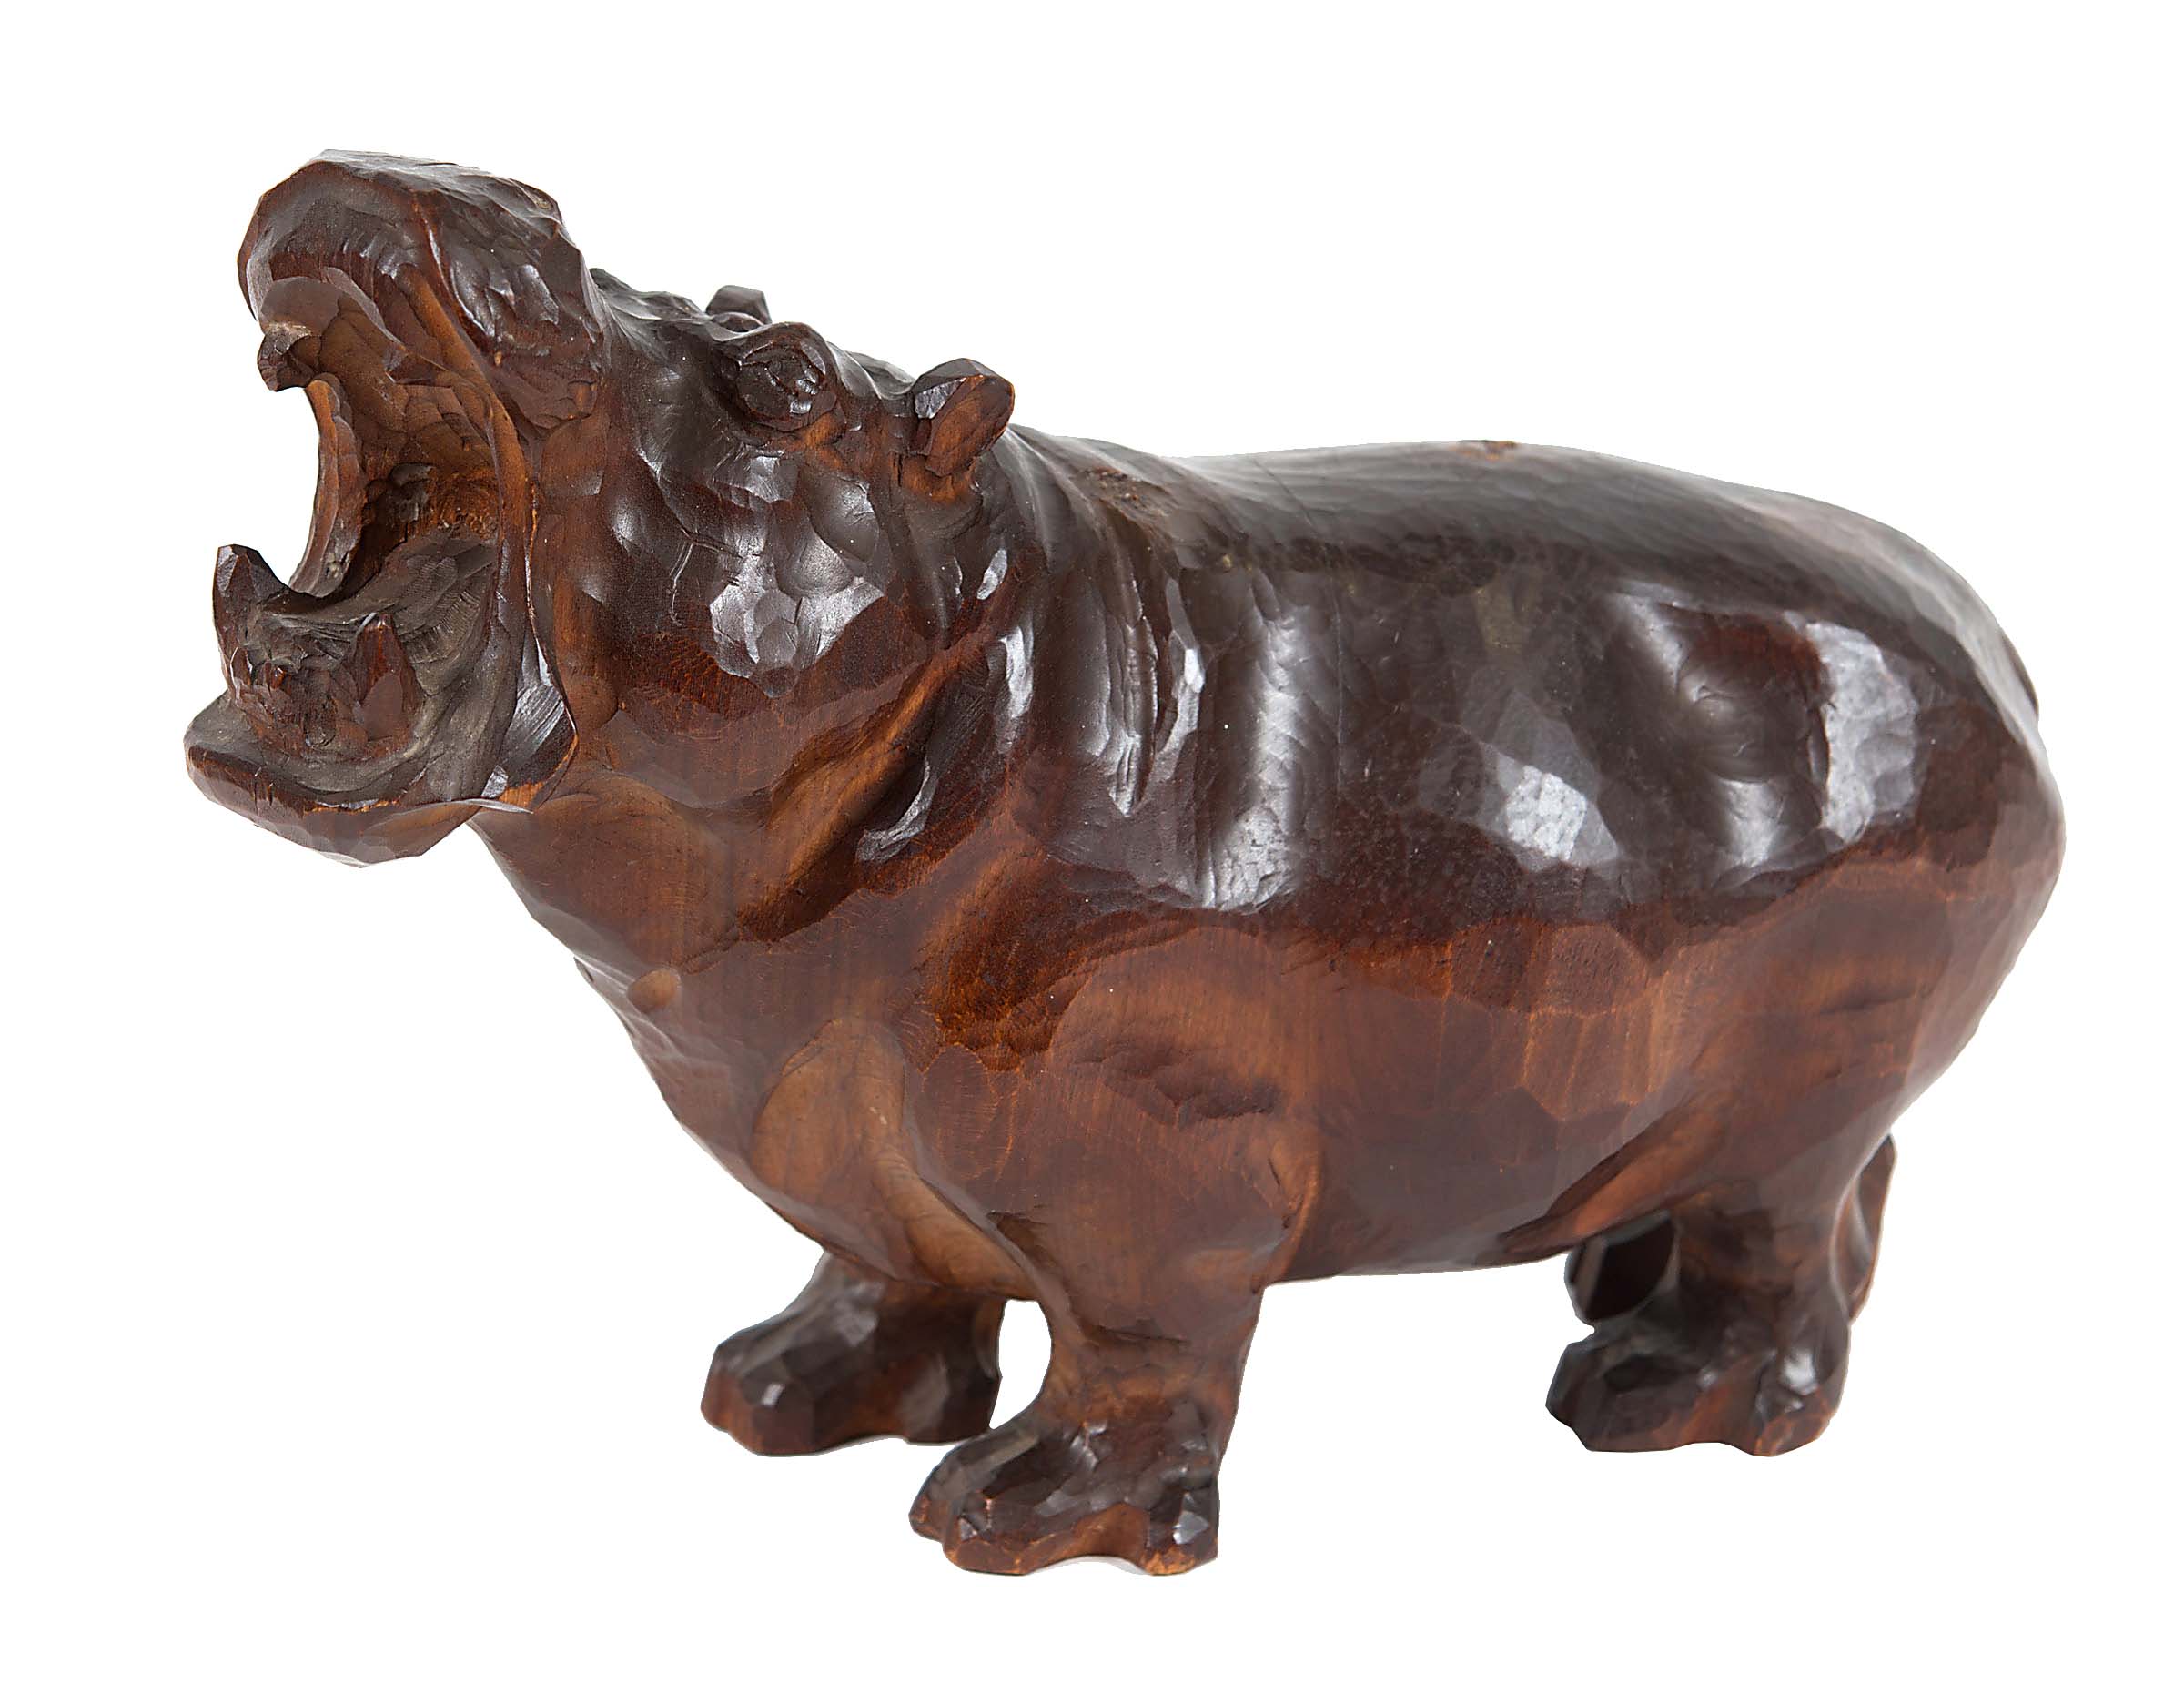 WOODEN FIGURE OF A HIPPO - BLACK FOREST a carved wooden figure of a Hippo, probably made in the